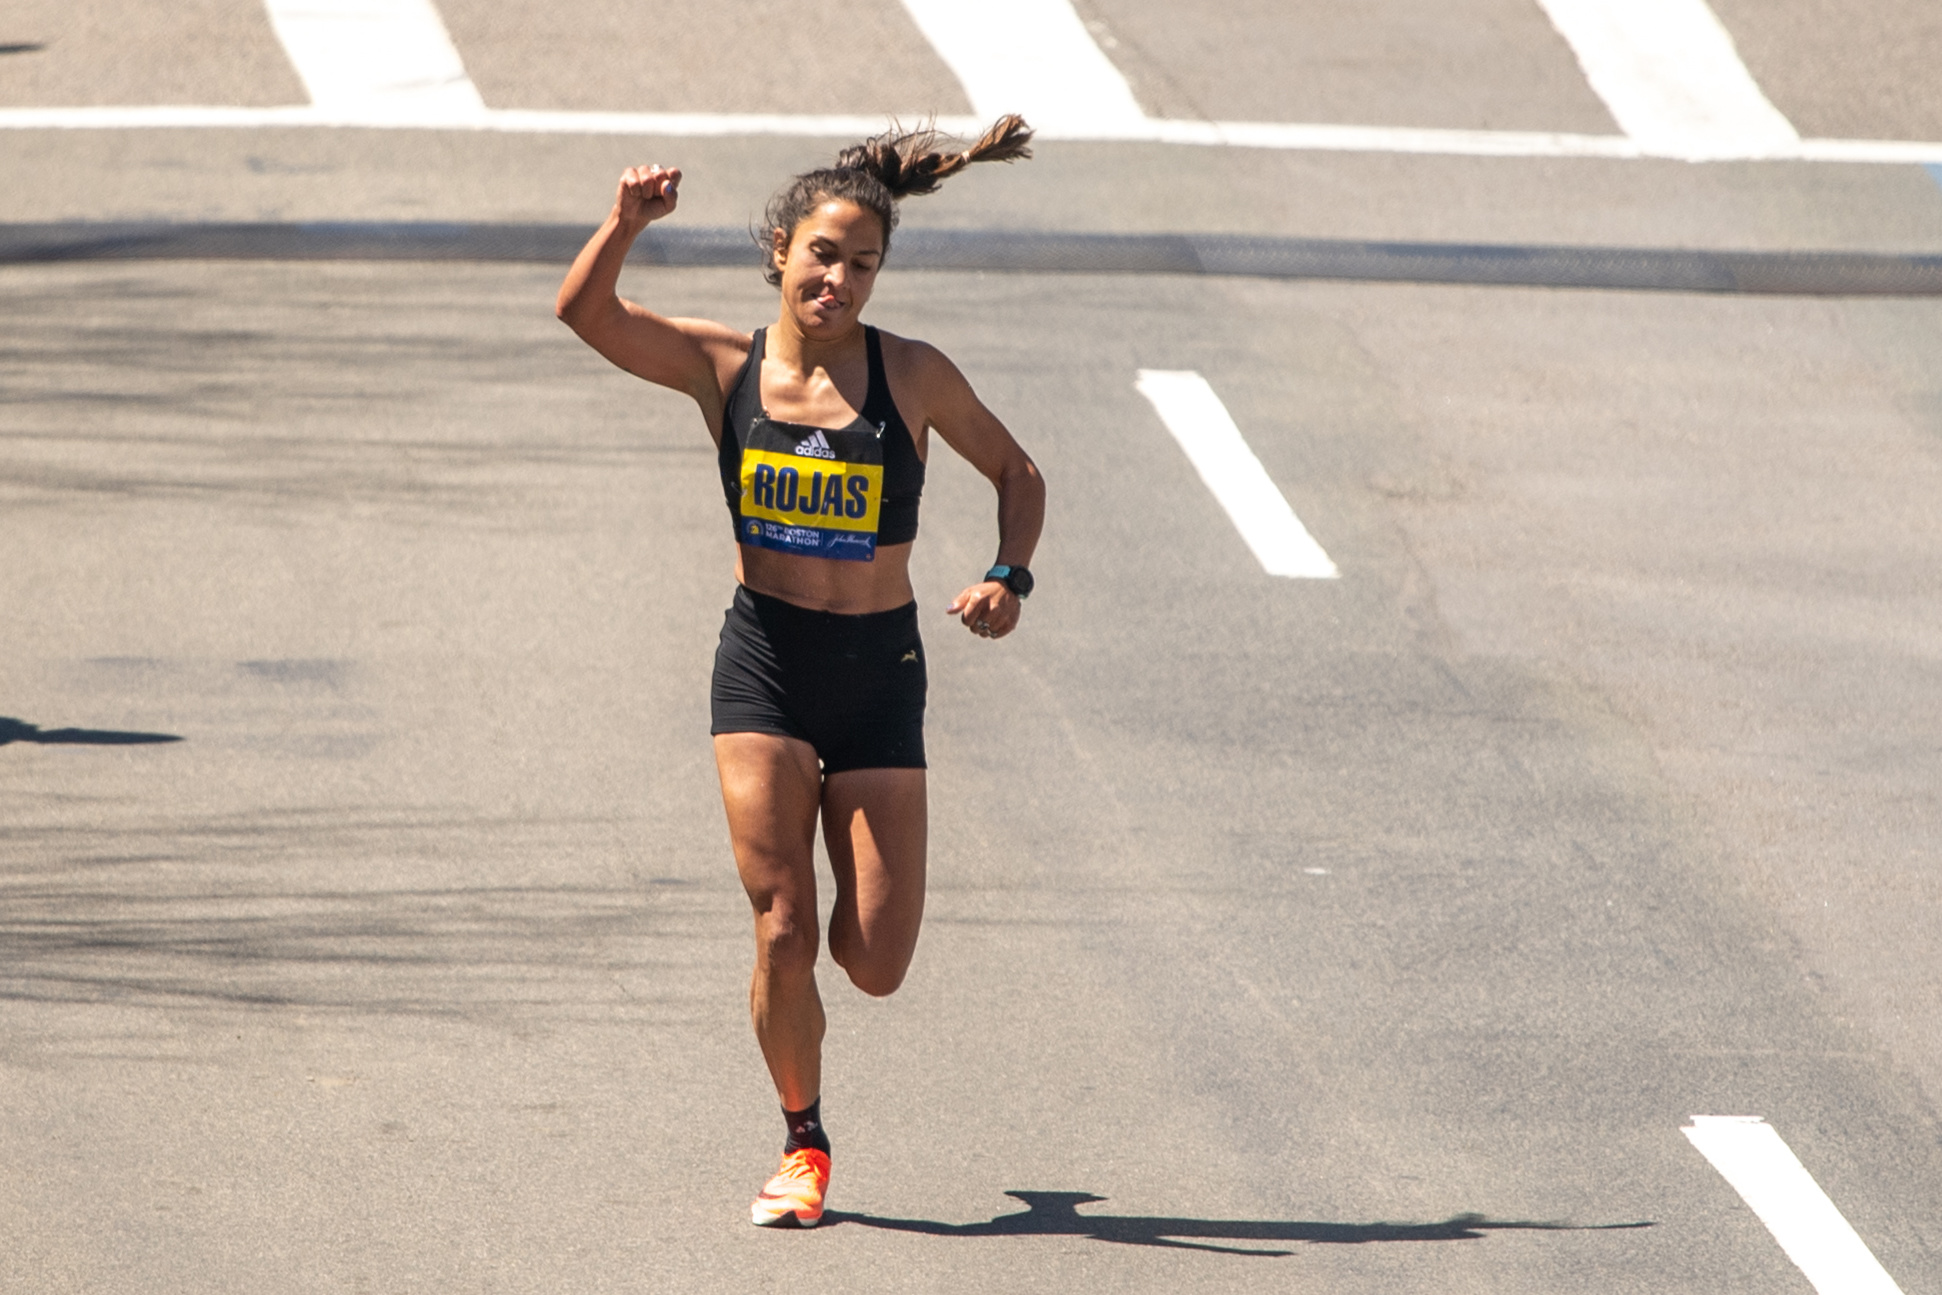 Nell Rojas of the United States gestures as she sprints toward the finish line of the Boston Marathon on April 18, 2022 on Boylston Street in Boston, MA.  &nbsp;   